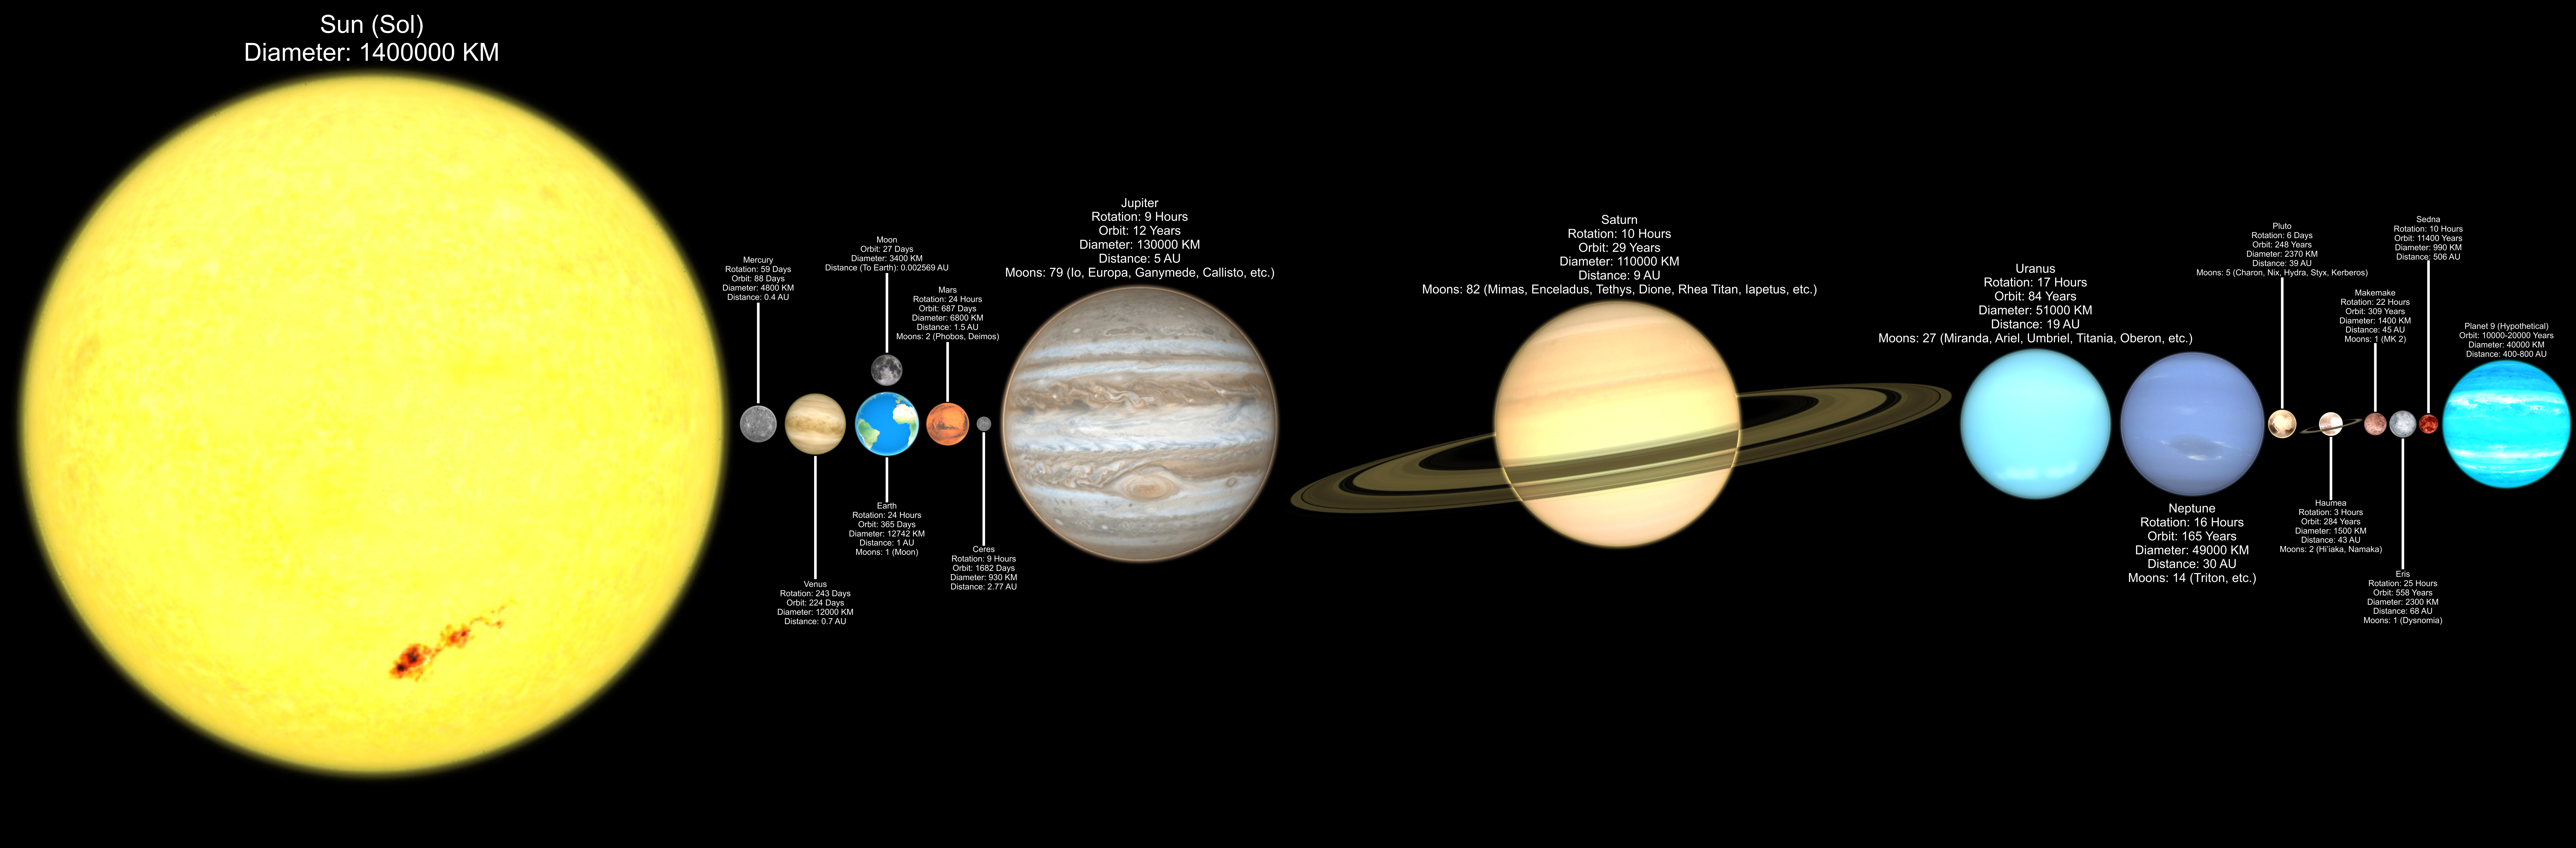 Realistic Solar System Labeled By Jordanli04 On Deviantart - roblox solar system